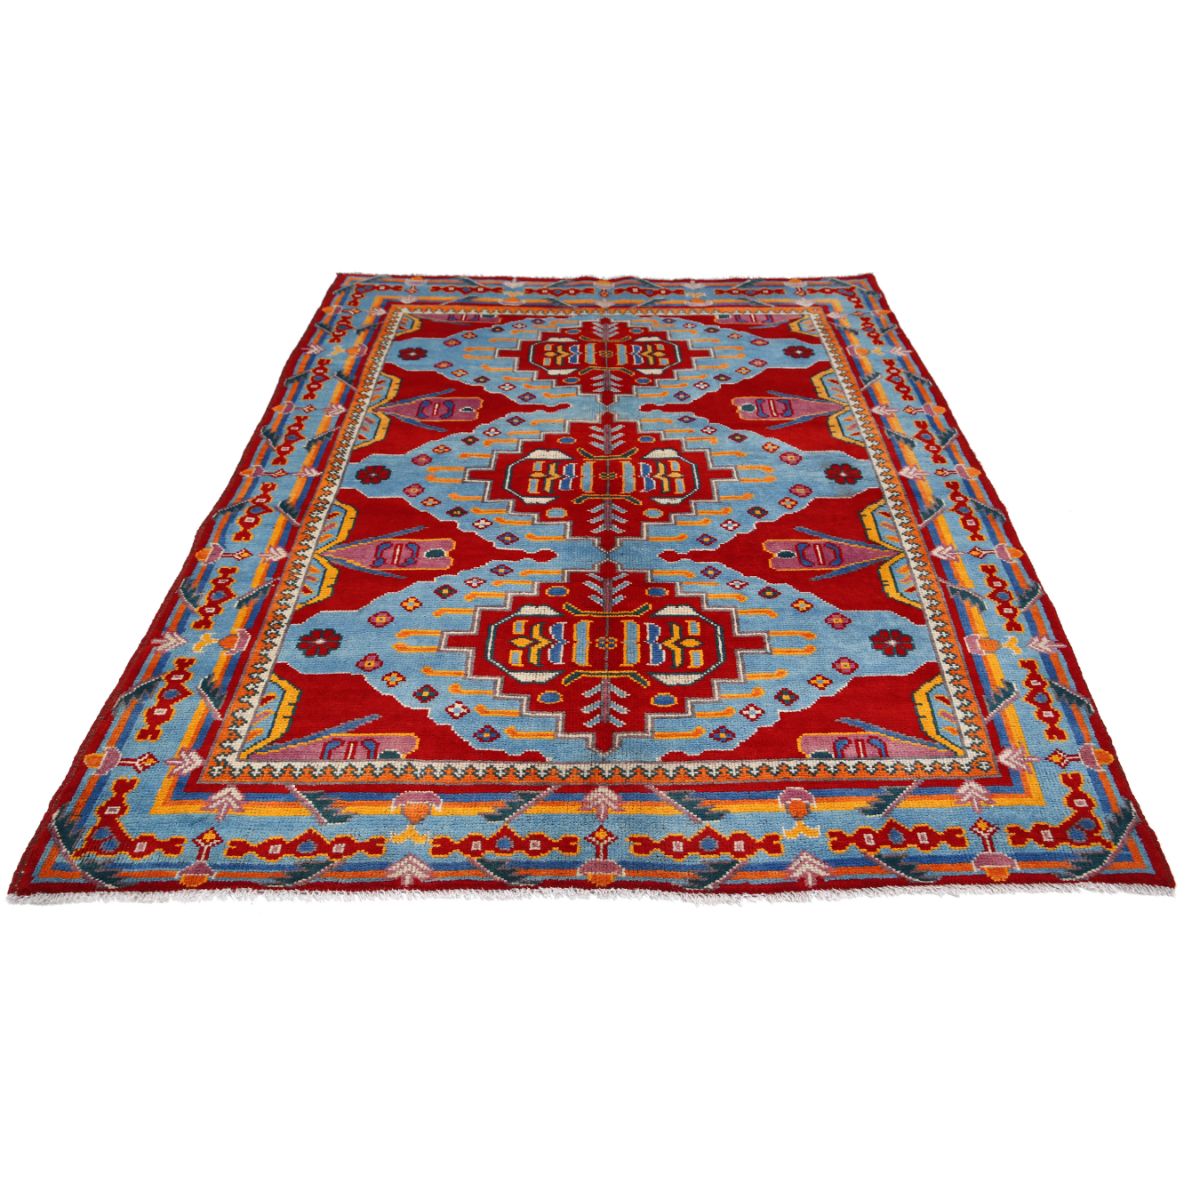 Revival 5' 10" X 7' 8" Wool Hand Knotted Rug